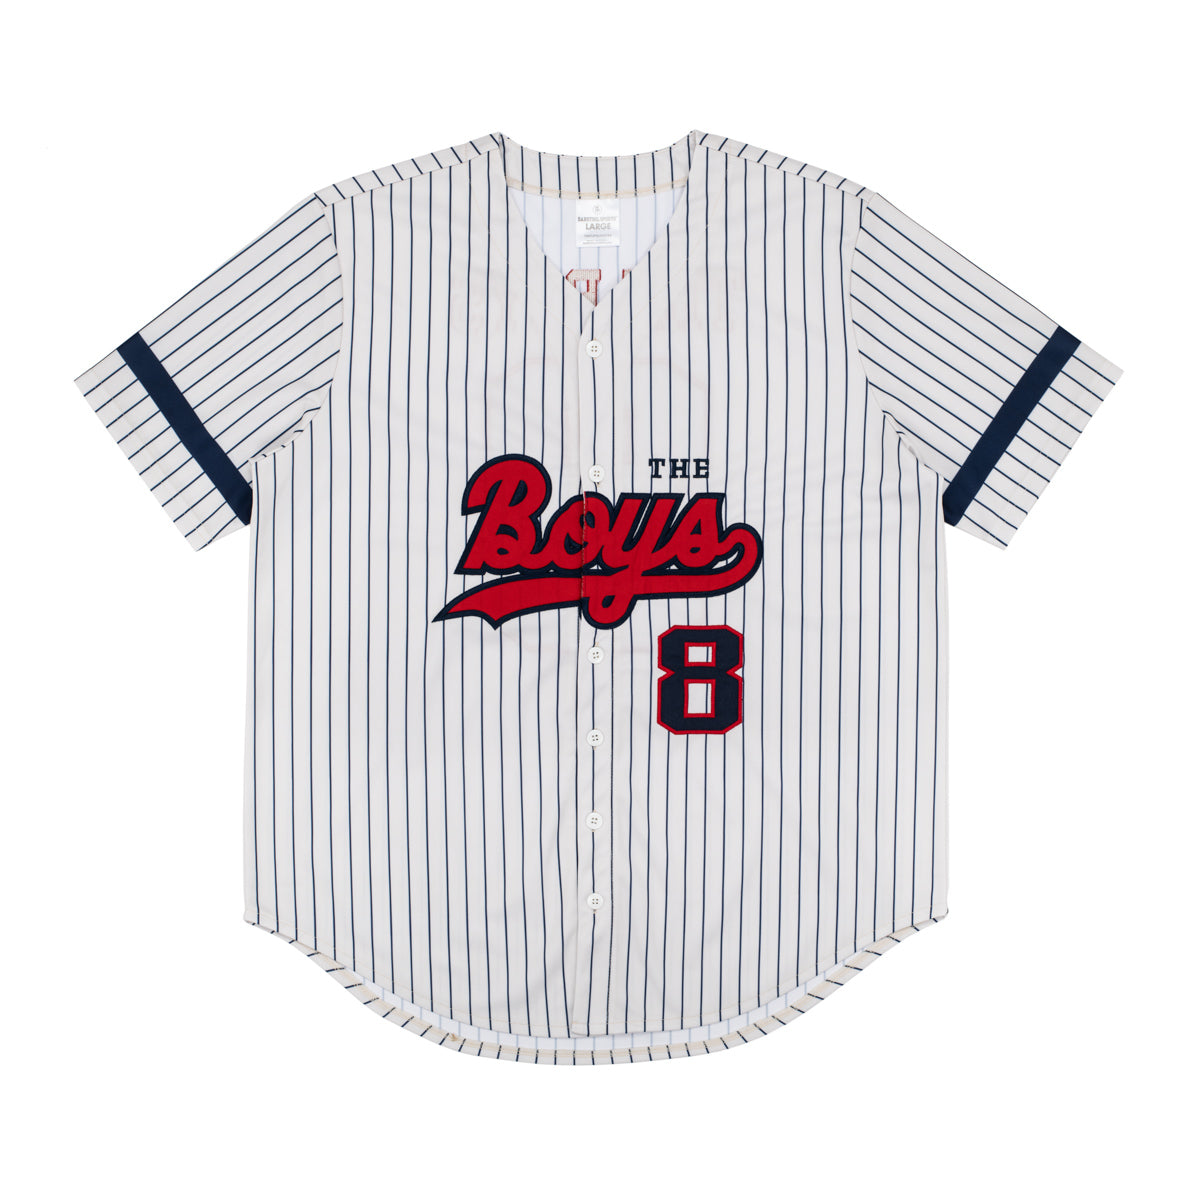 baseball jersey for dogs